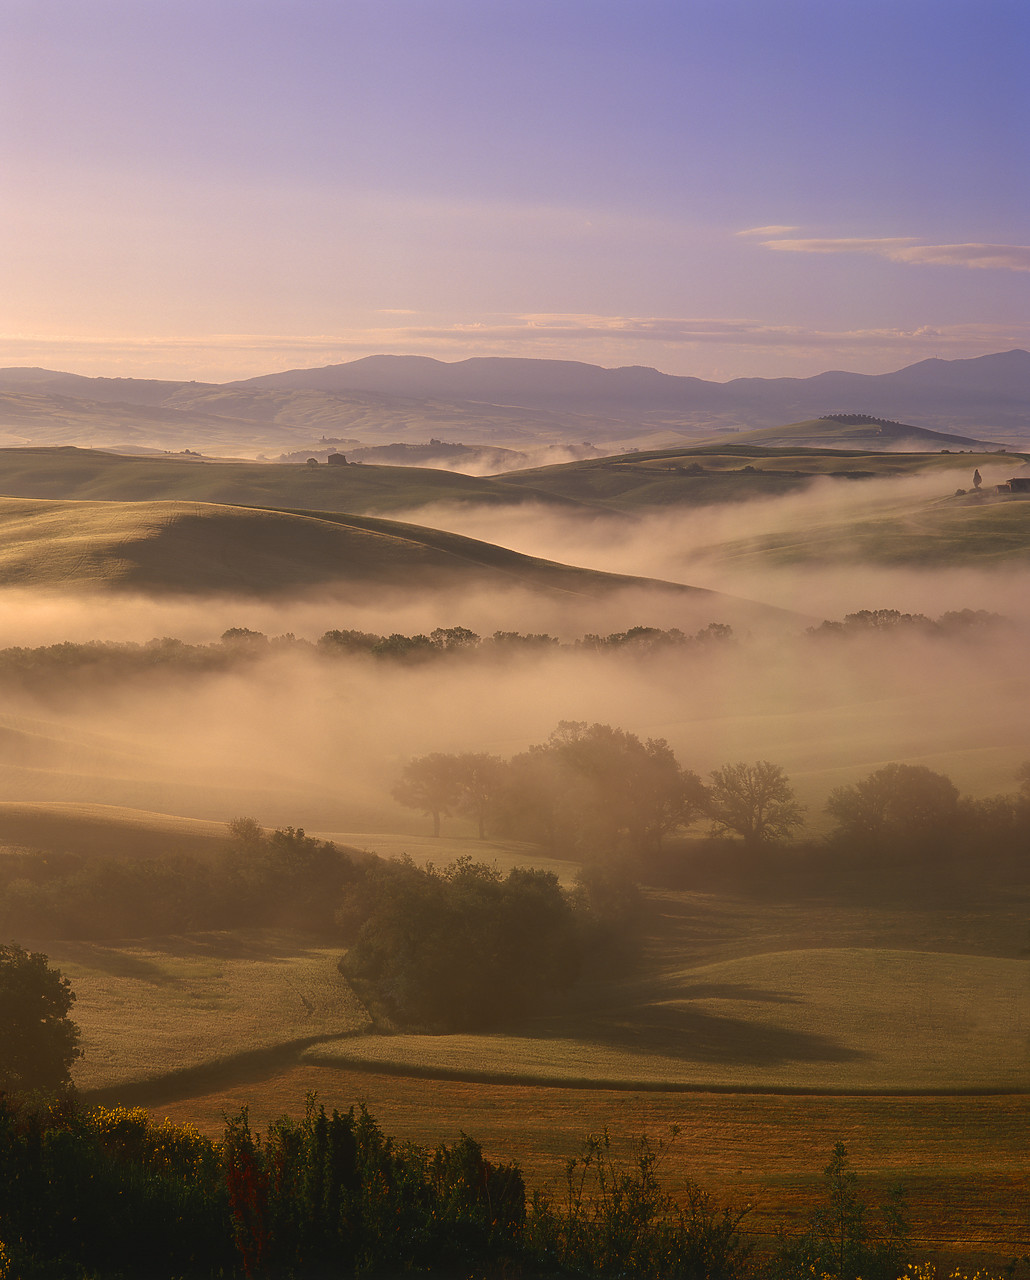 #020148-2 - Valley in Morning Mist, San Quirico, Tuscany, Italy